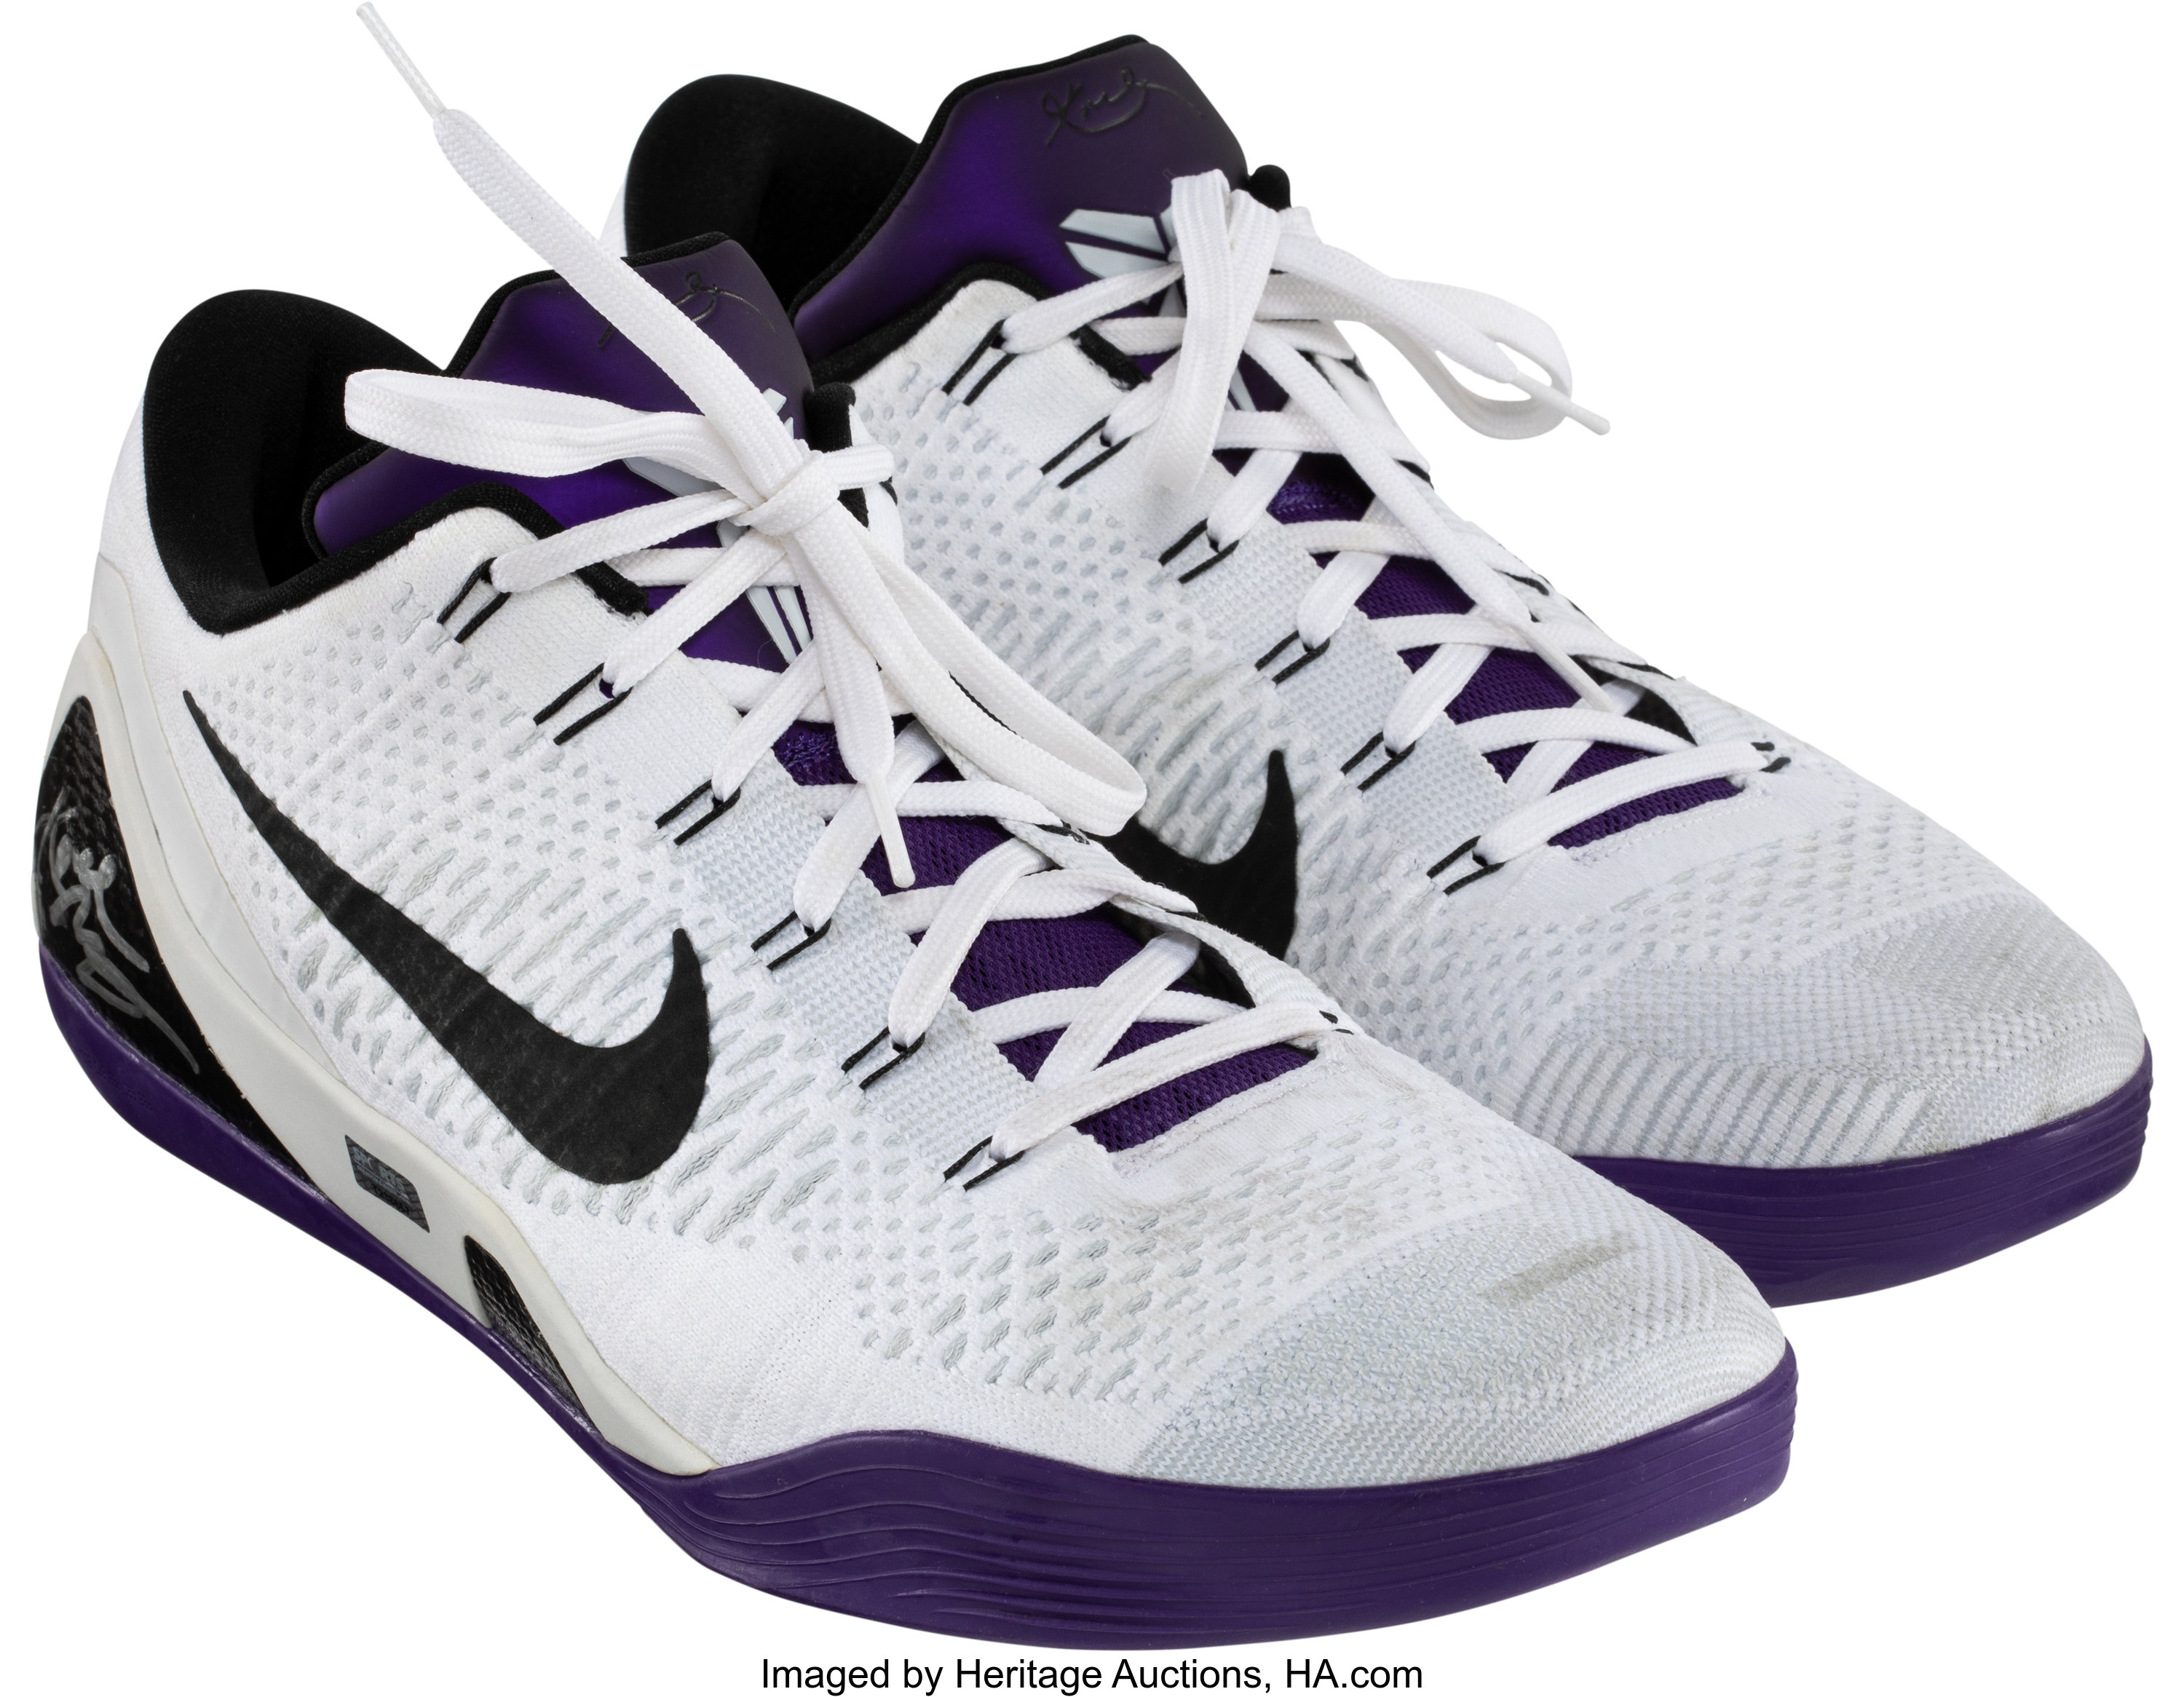 Los Angeles Lakers Nike Shoes, Signed by Kobe Bryant - CharityStars